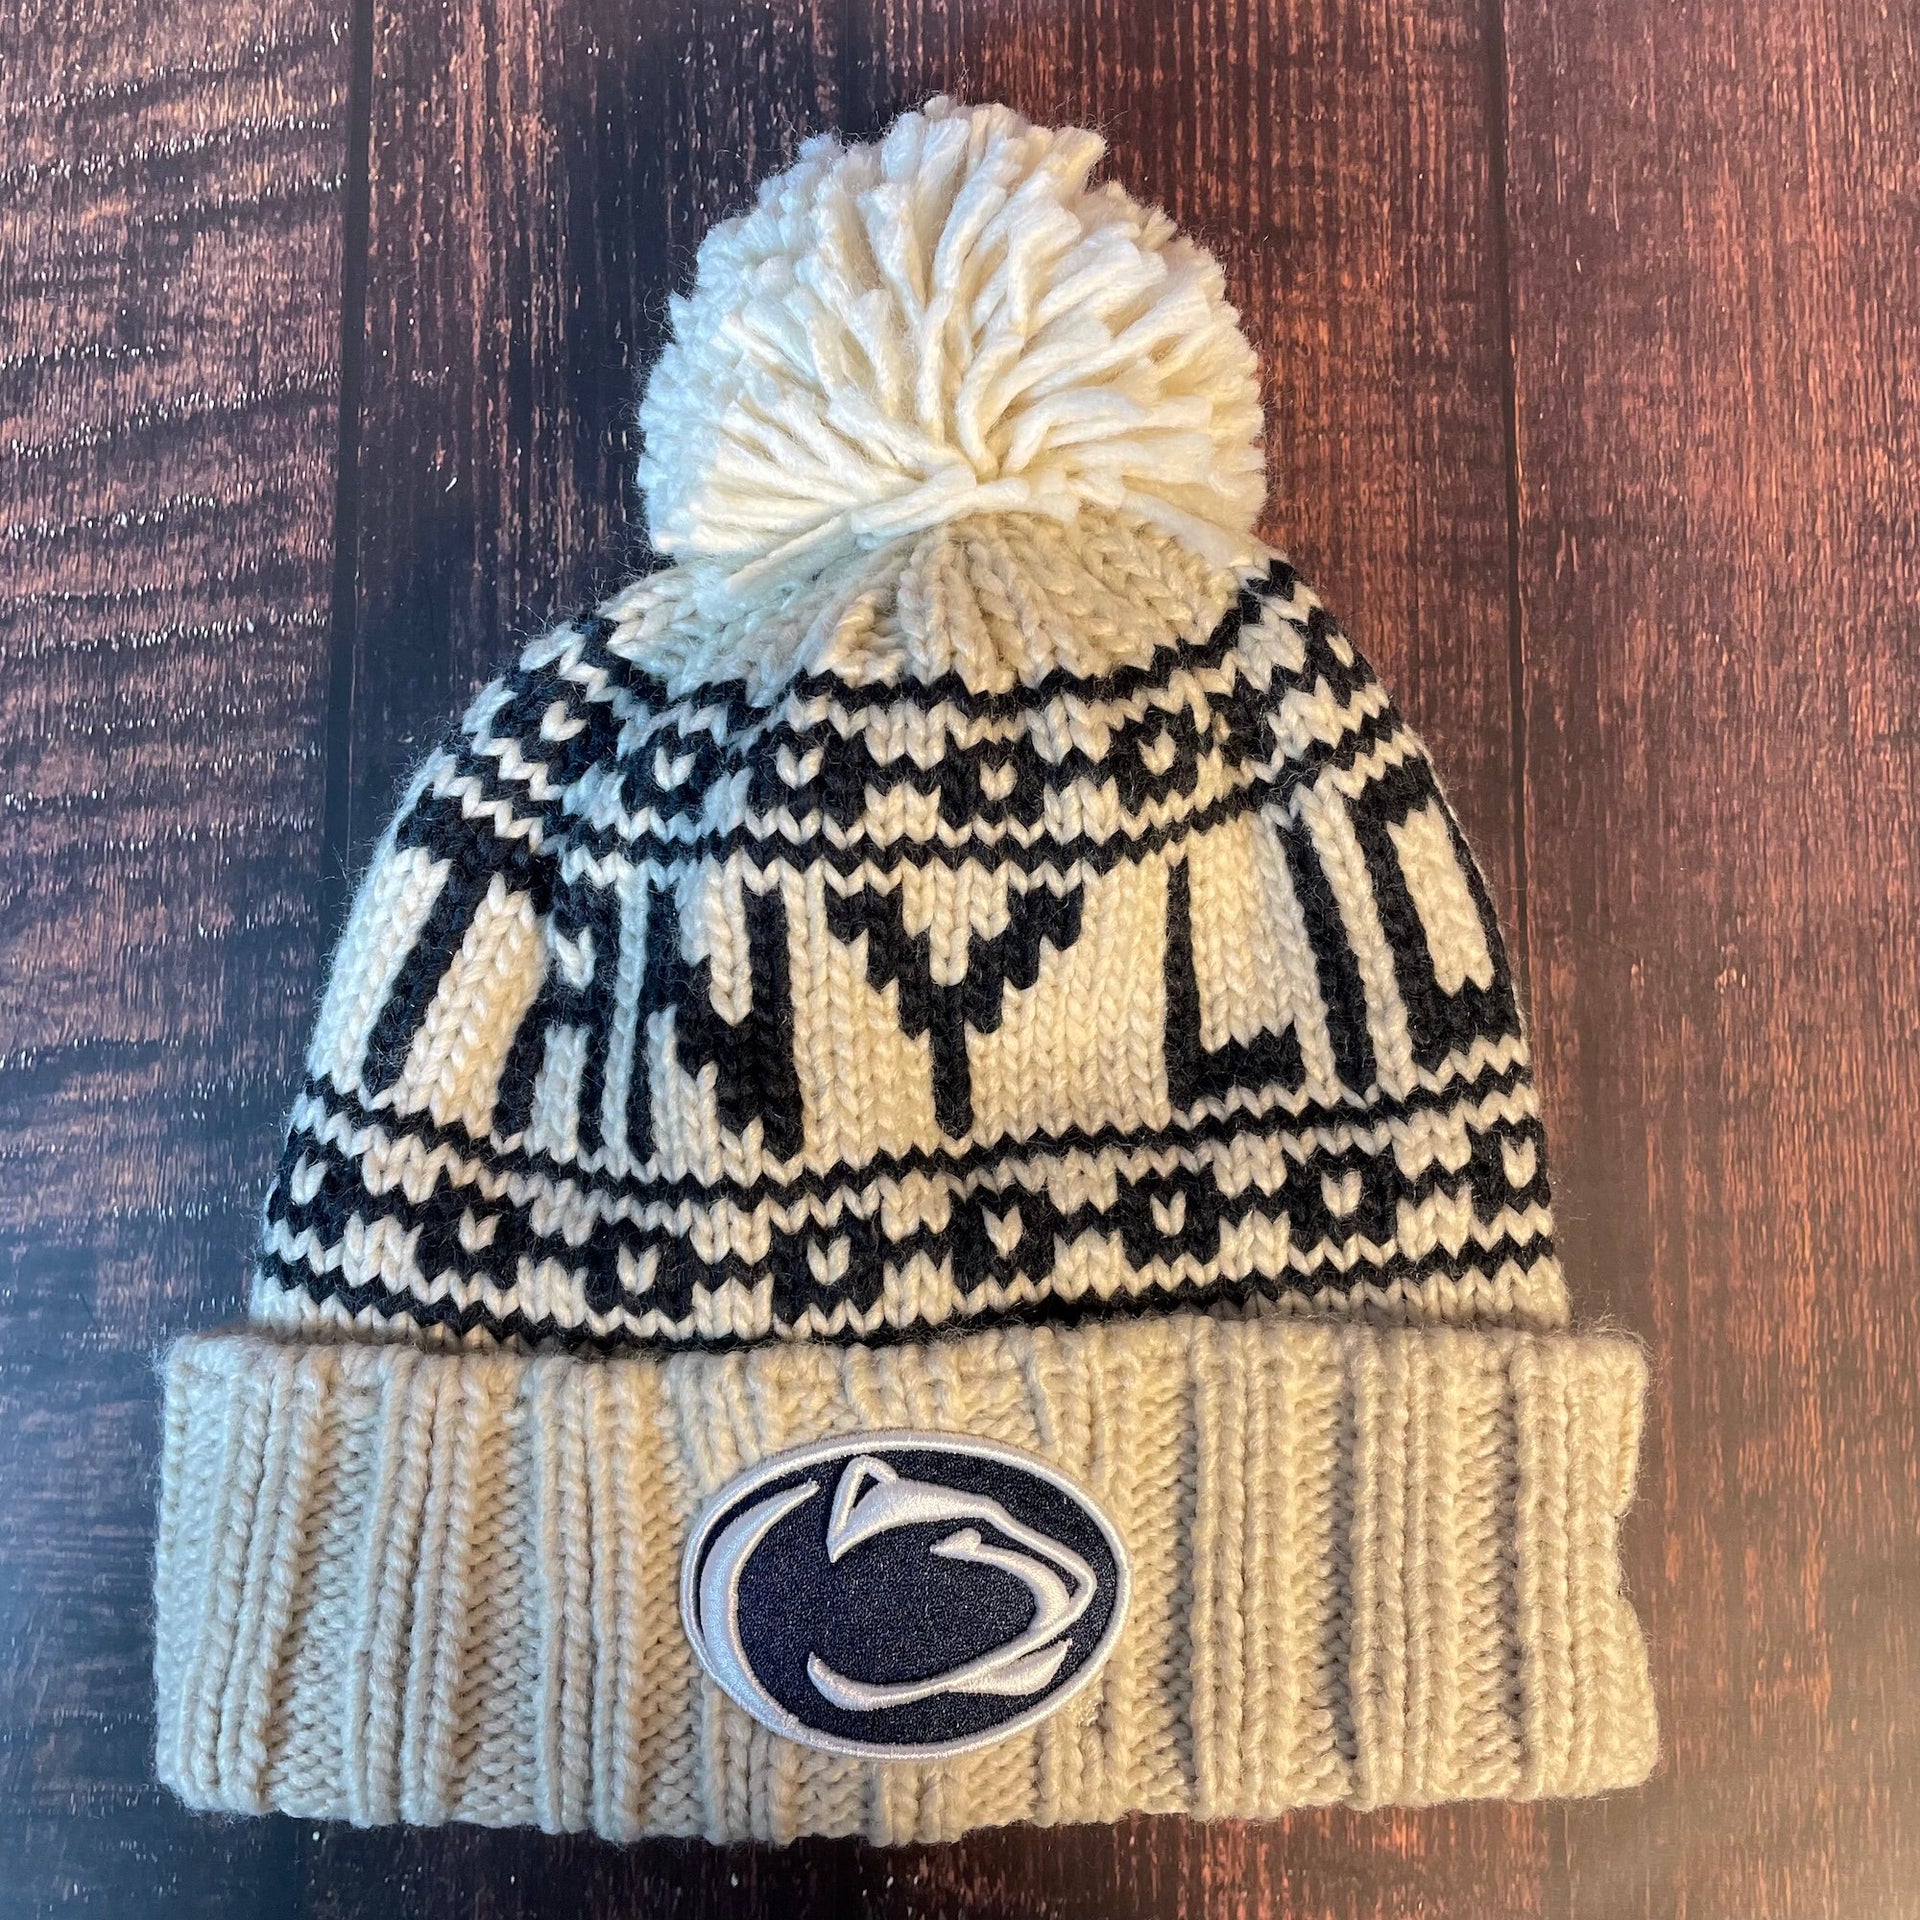 The front of the Penn State Nittany Lions 2022 OSFM Beanie features a Penn State Nittany Lions logo at the front raised cuff